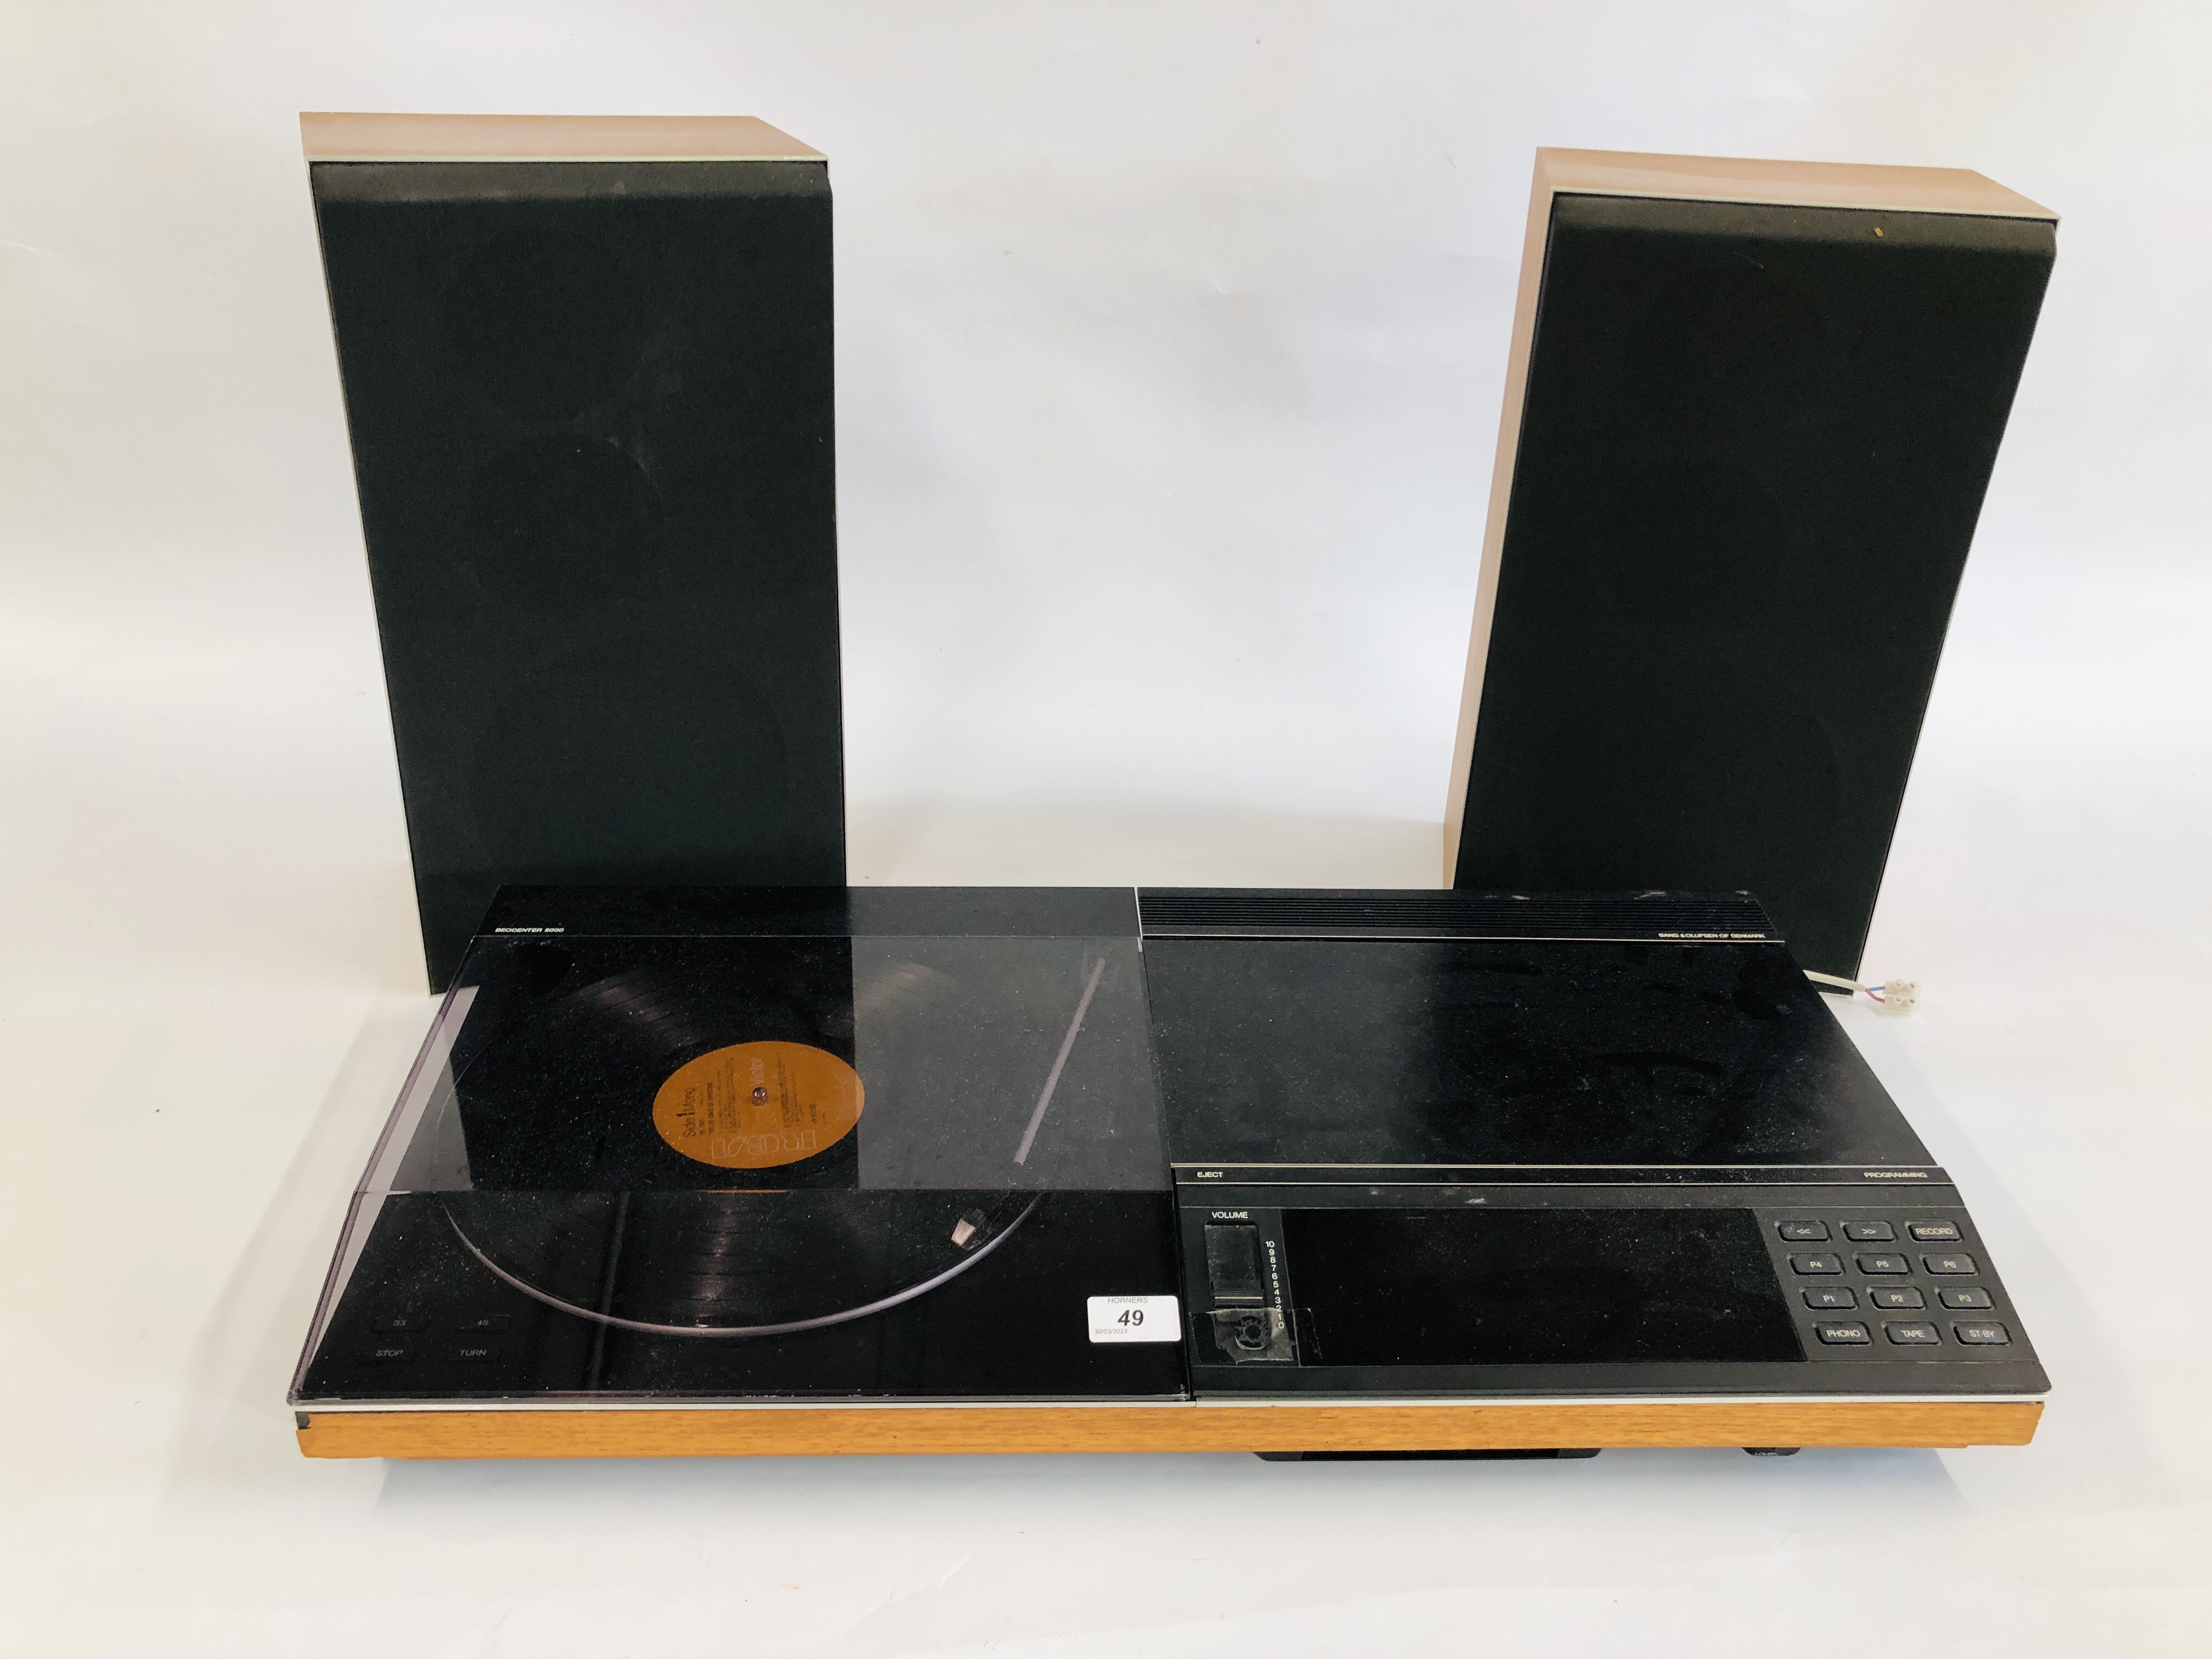 A BANG & OLUFSEN BEOCENTRE 5000 COMPLETE WITH A PAIR OF BEOVAX 545 SPEAKERS - SOLD AS SEEN.